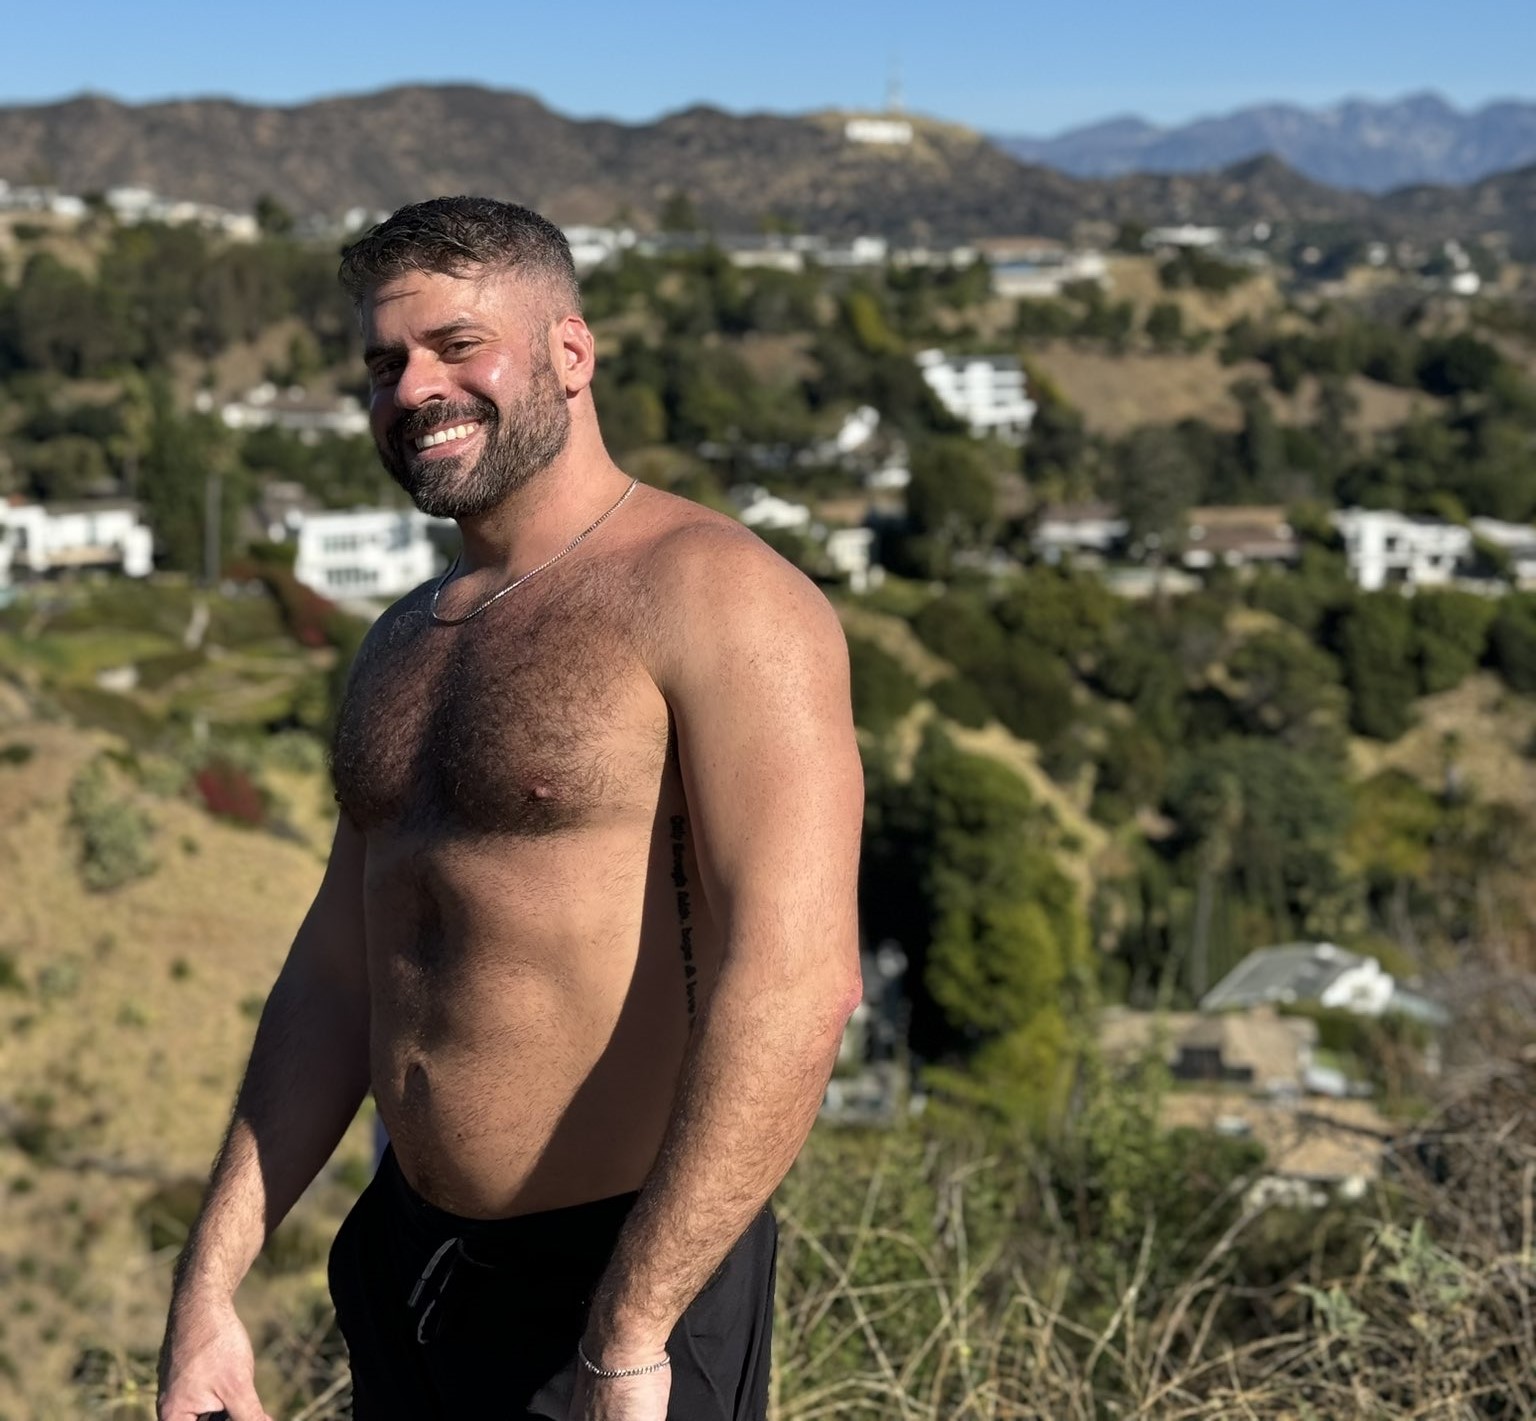 Max Romano standing shirtless outside smiling for a photo while wearing black sweat shorts